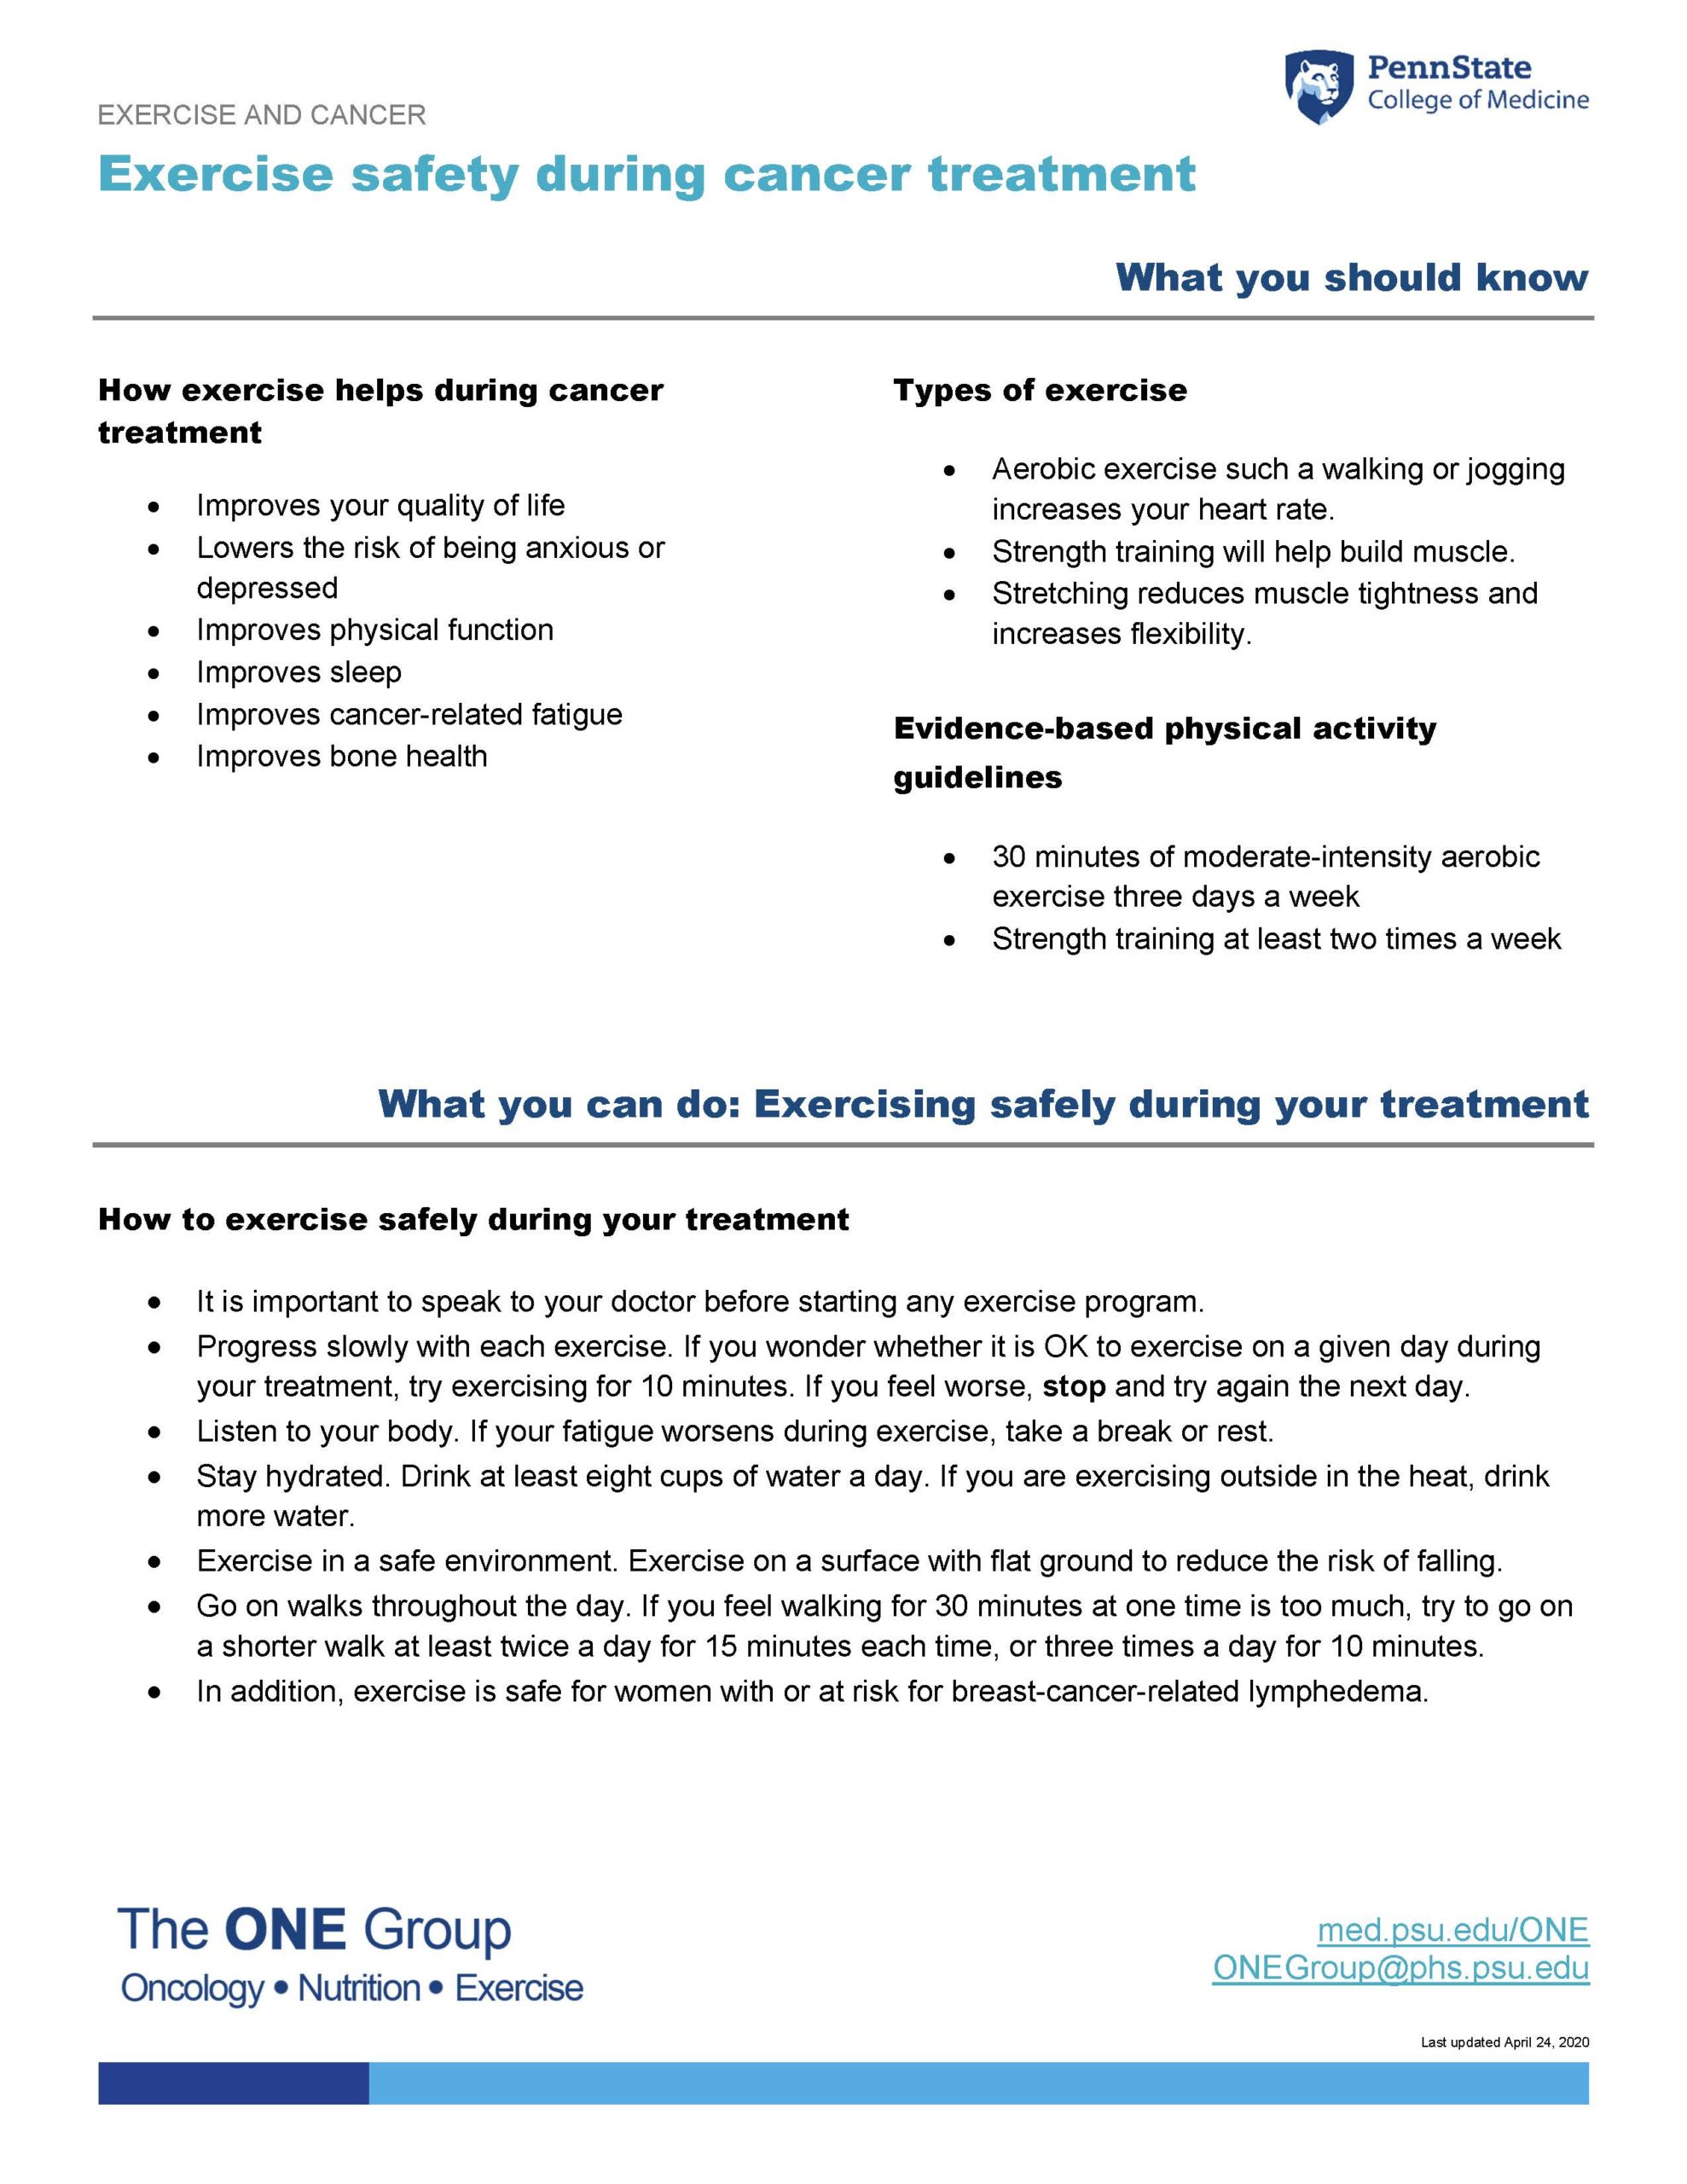 The exercise safety during cancer treatment guide from The ONE Group includes the information on this page, formatted for print.